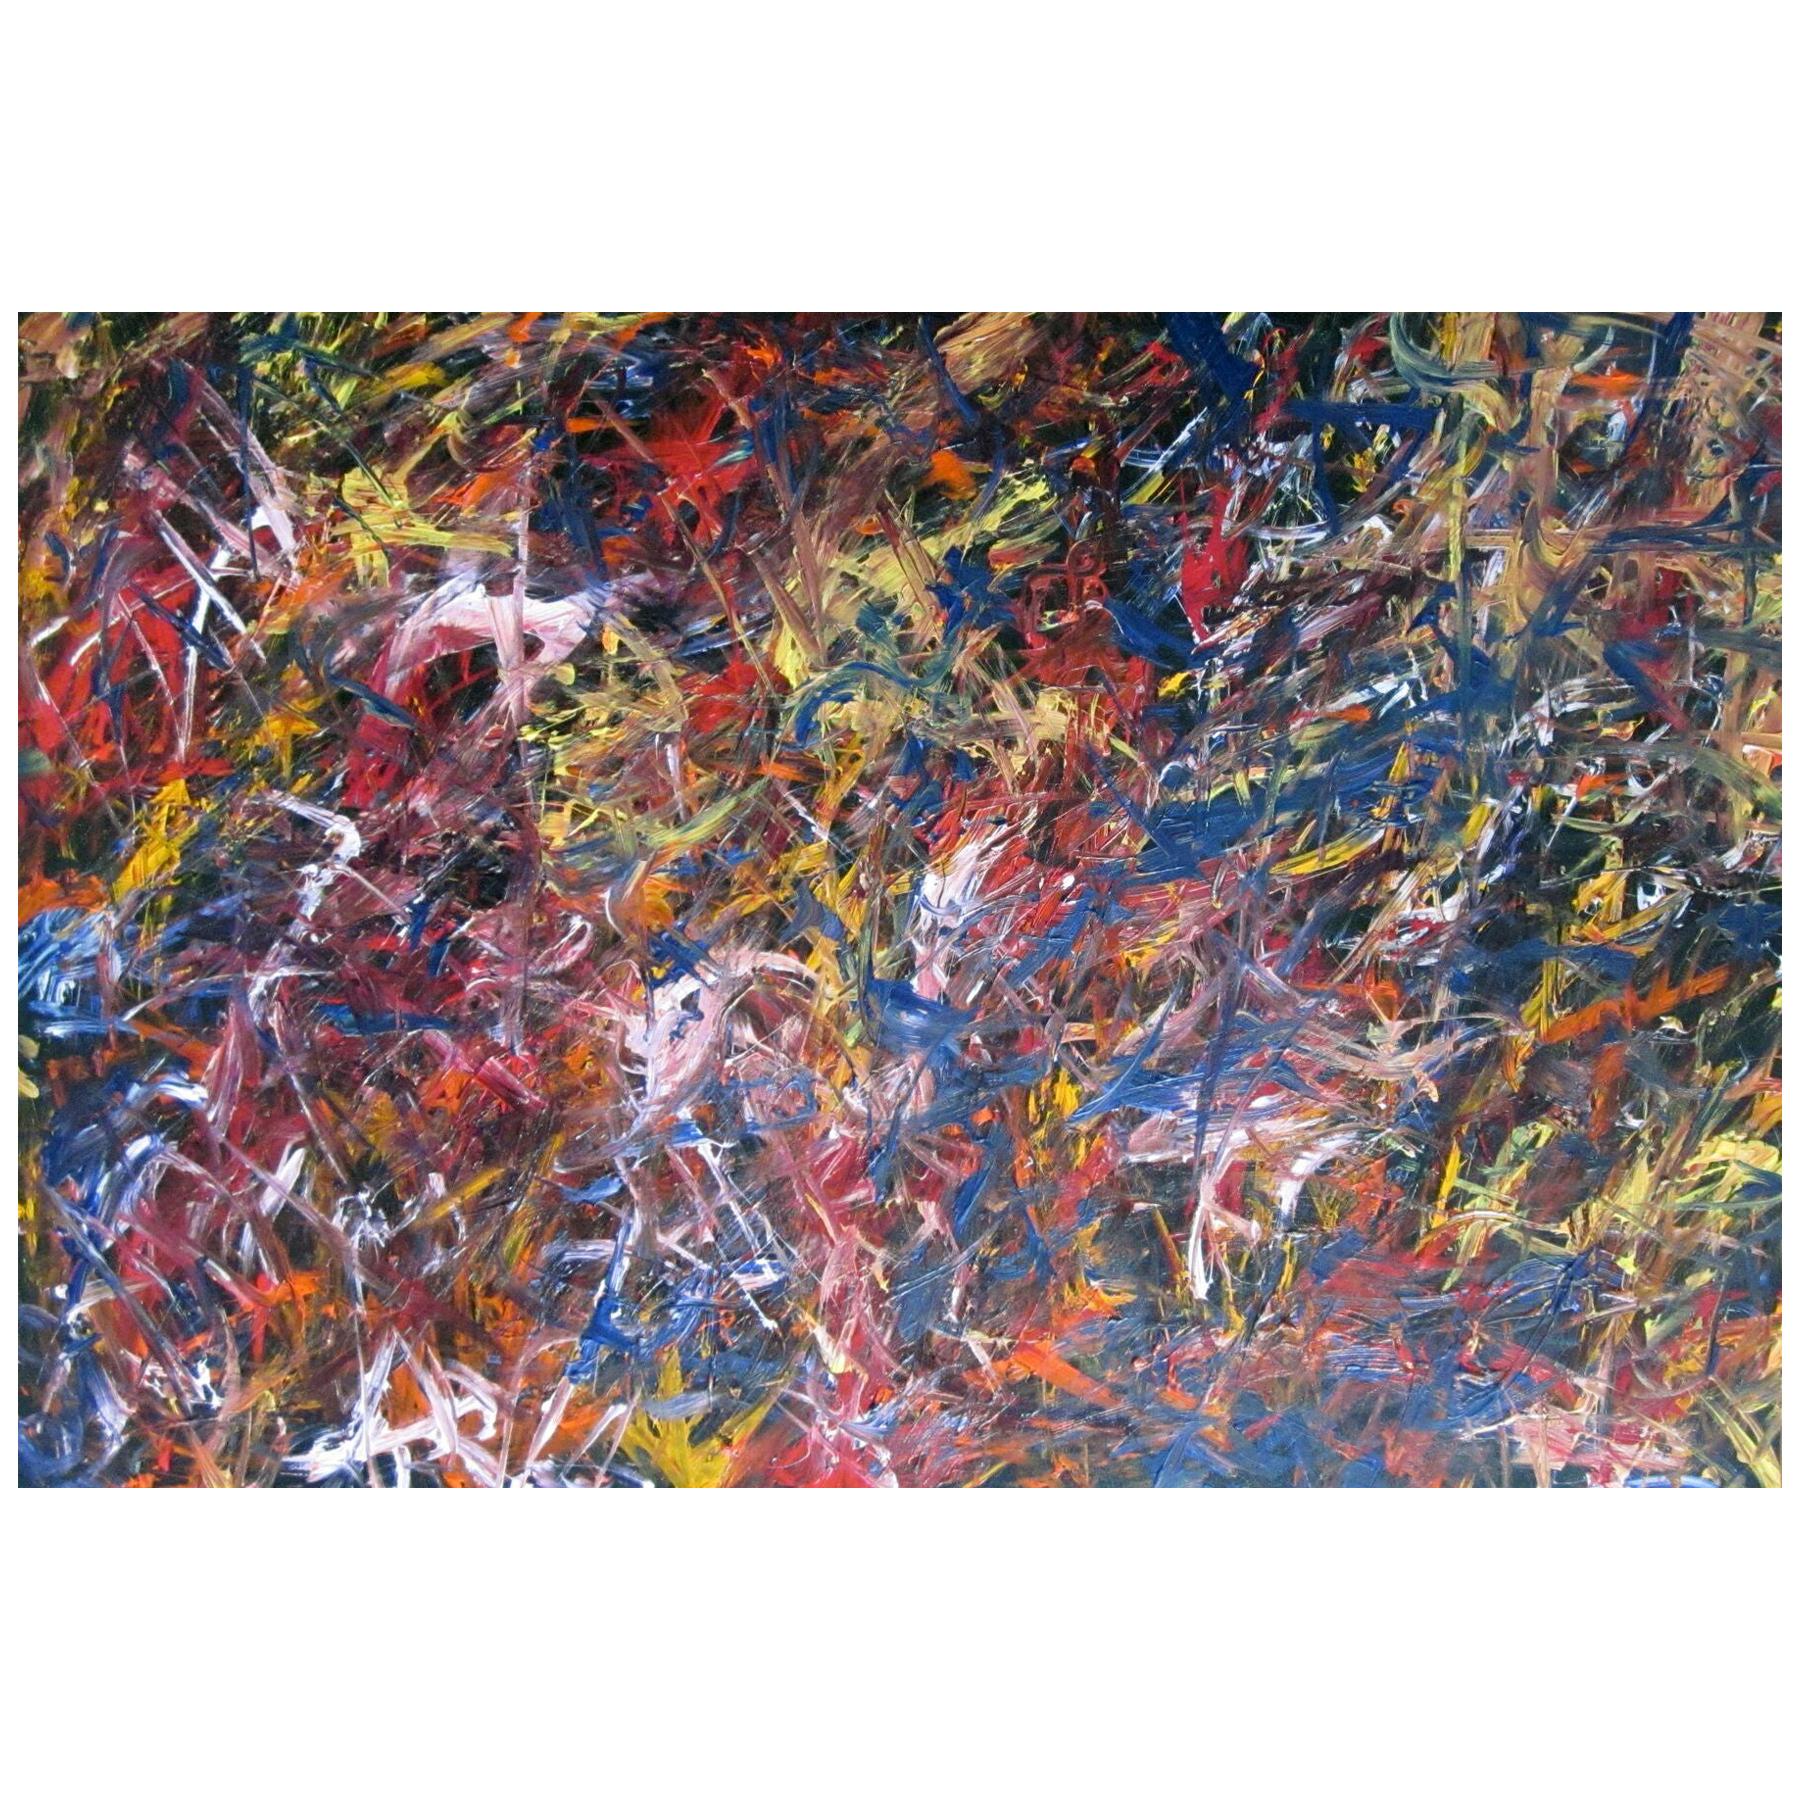 Abstract Acrylic on Canvas Painting "Tireless Defender" by Alexander Hecht